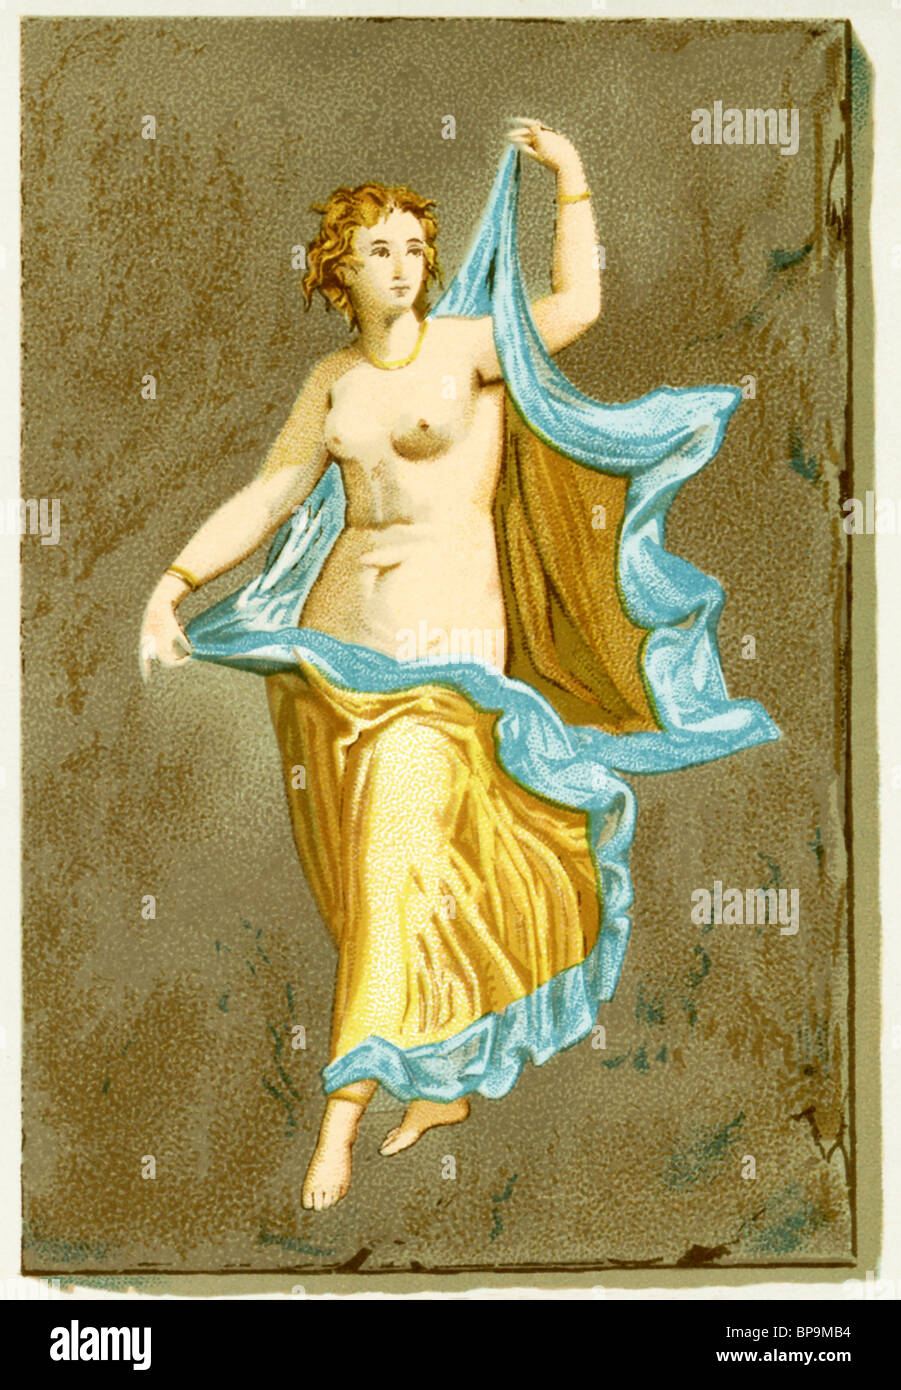 A colorful fresco uncovered in Pompeii, shows a dancing Maenad, a follower of Dionysus, the god of wine. Stock Photo